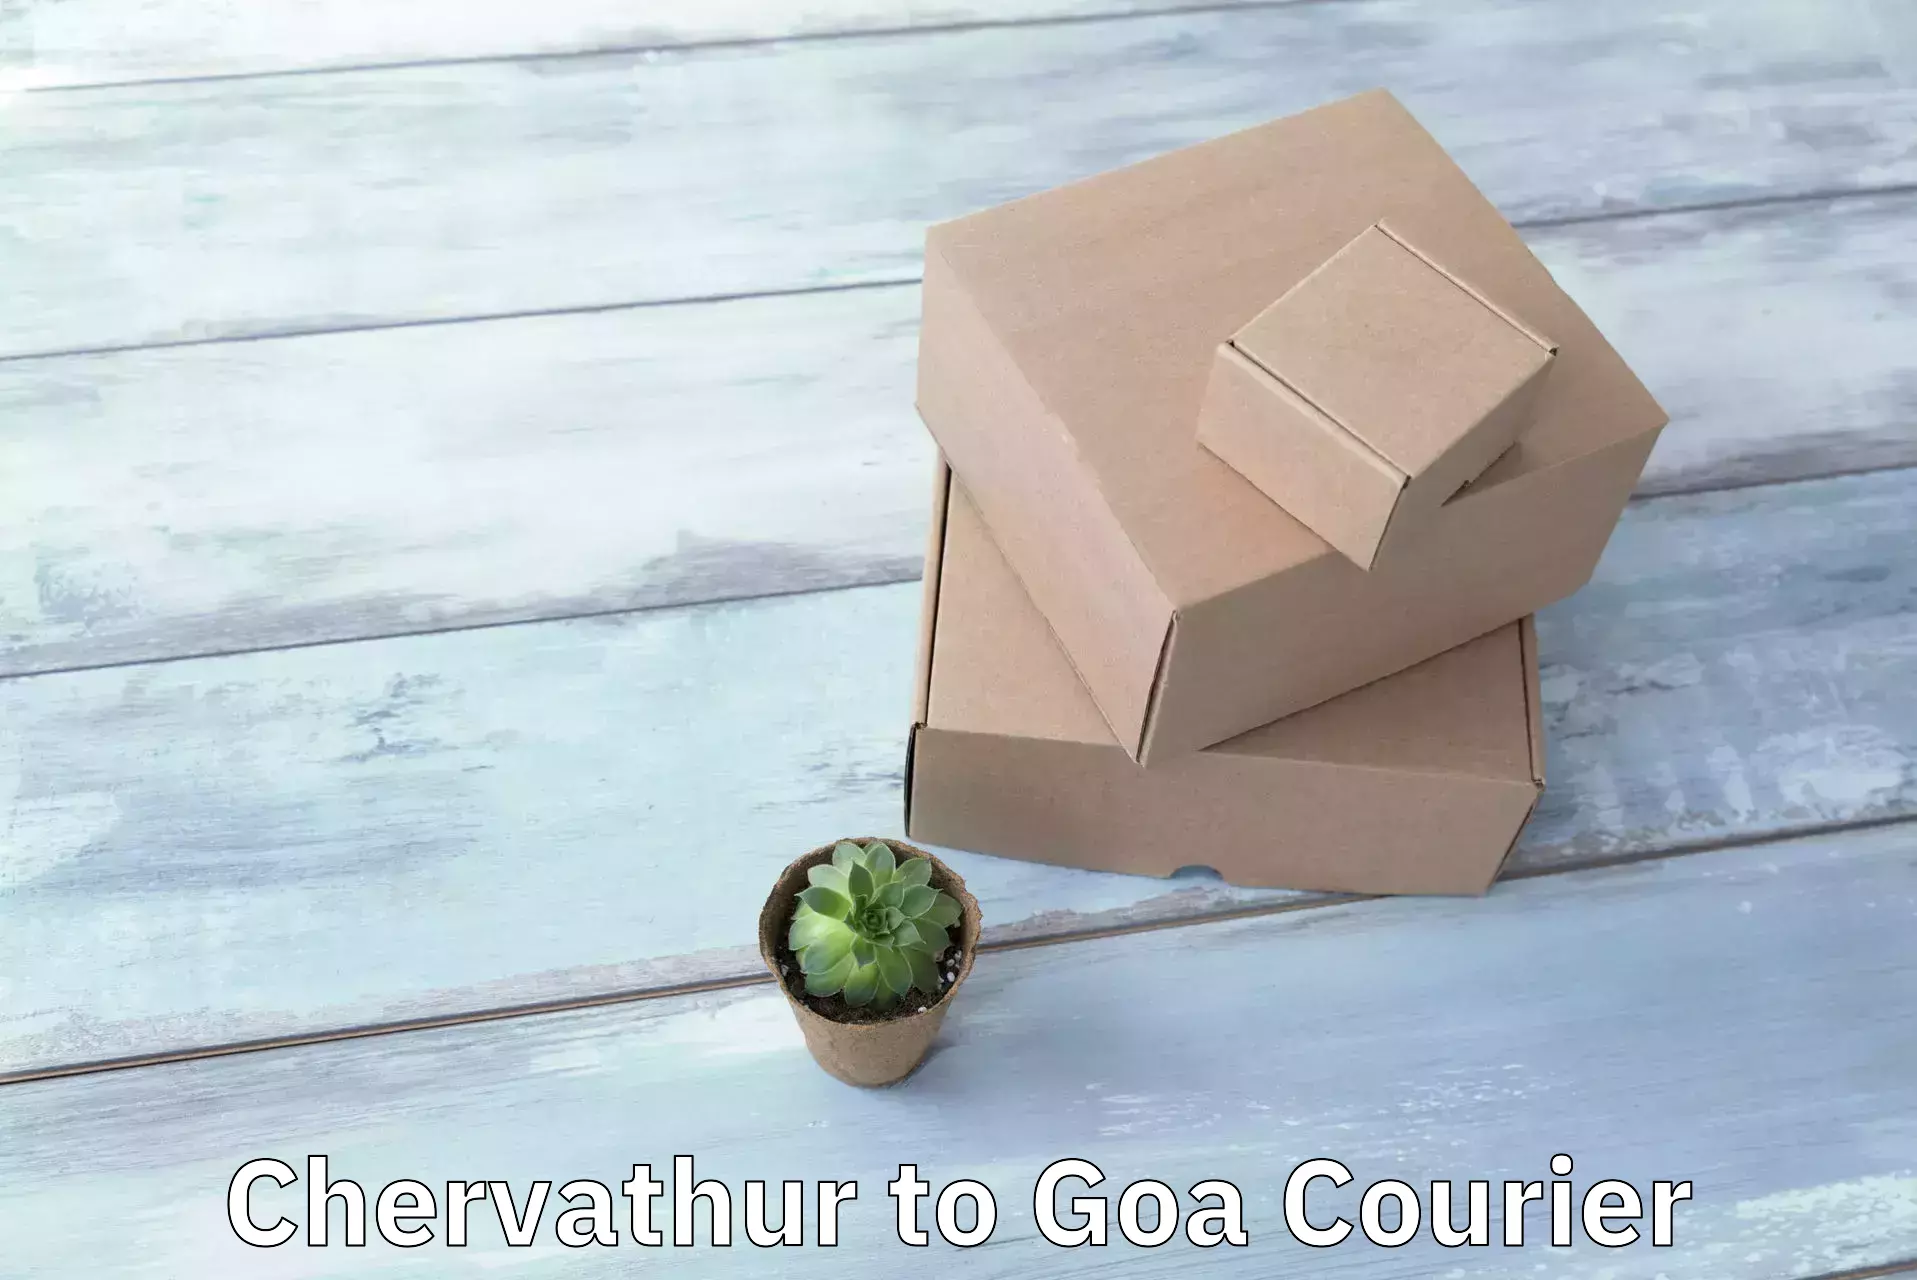 Courier service booking Chervathur to Panaji